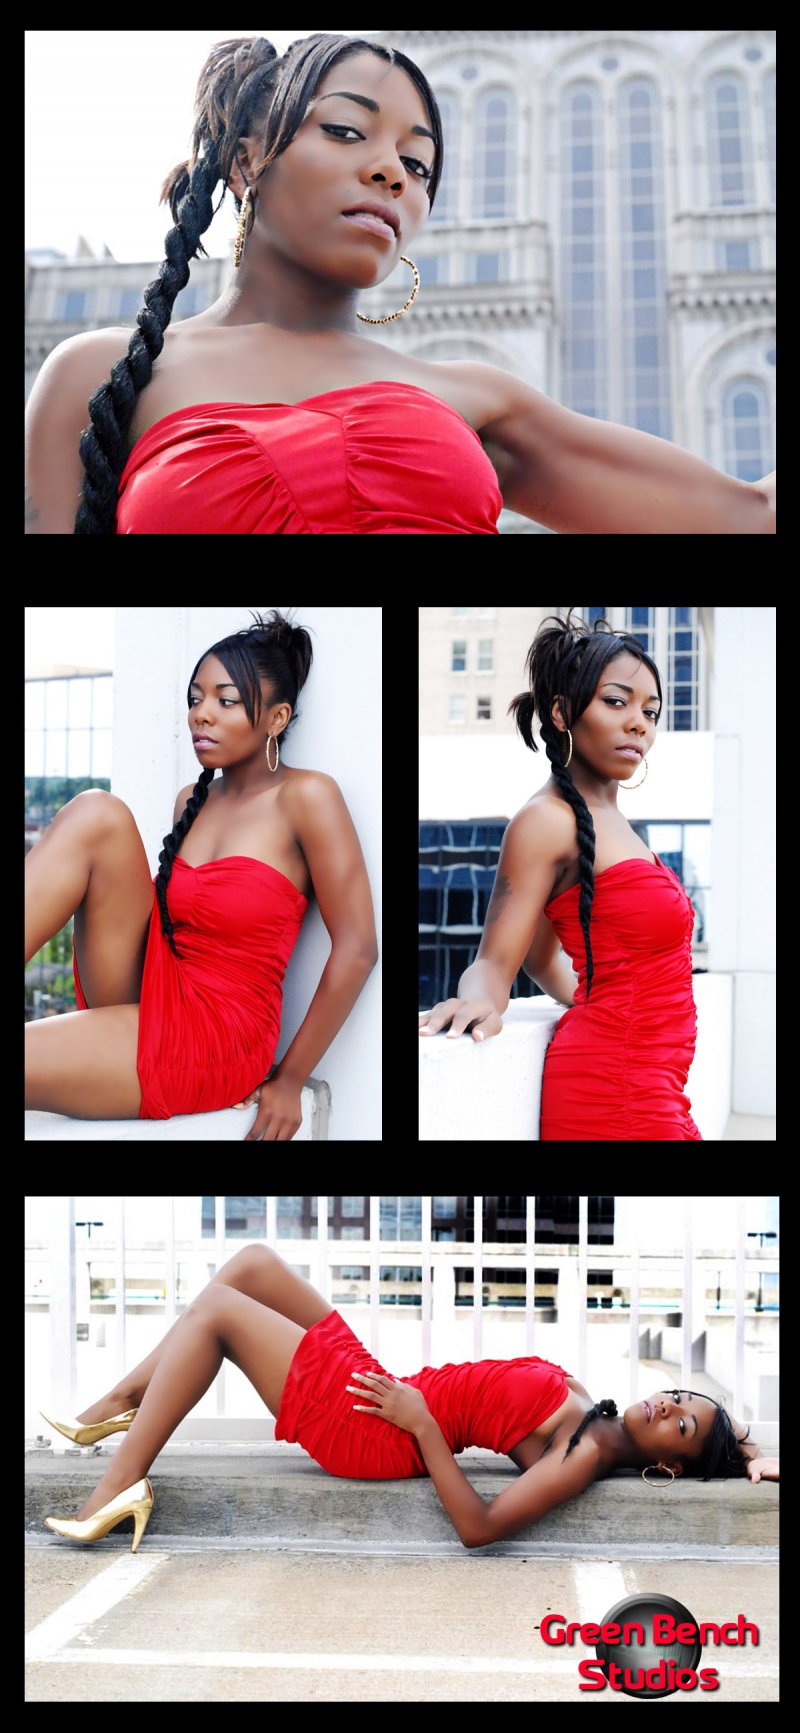 Male and Female model photo shoot of Green Bench Studios and Kelly Symone' in Greensboro,NC